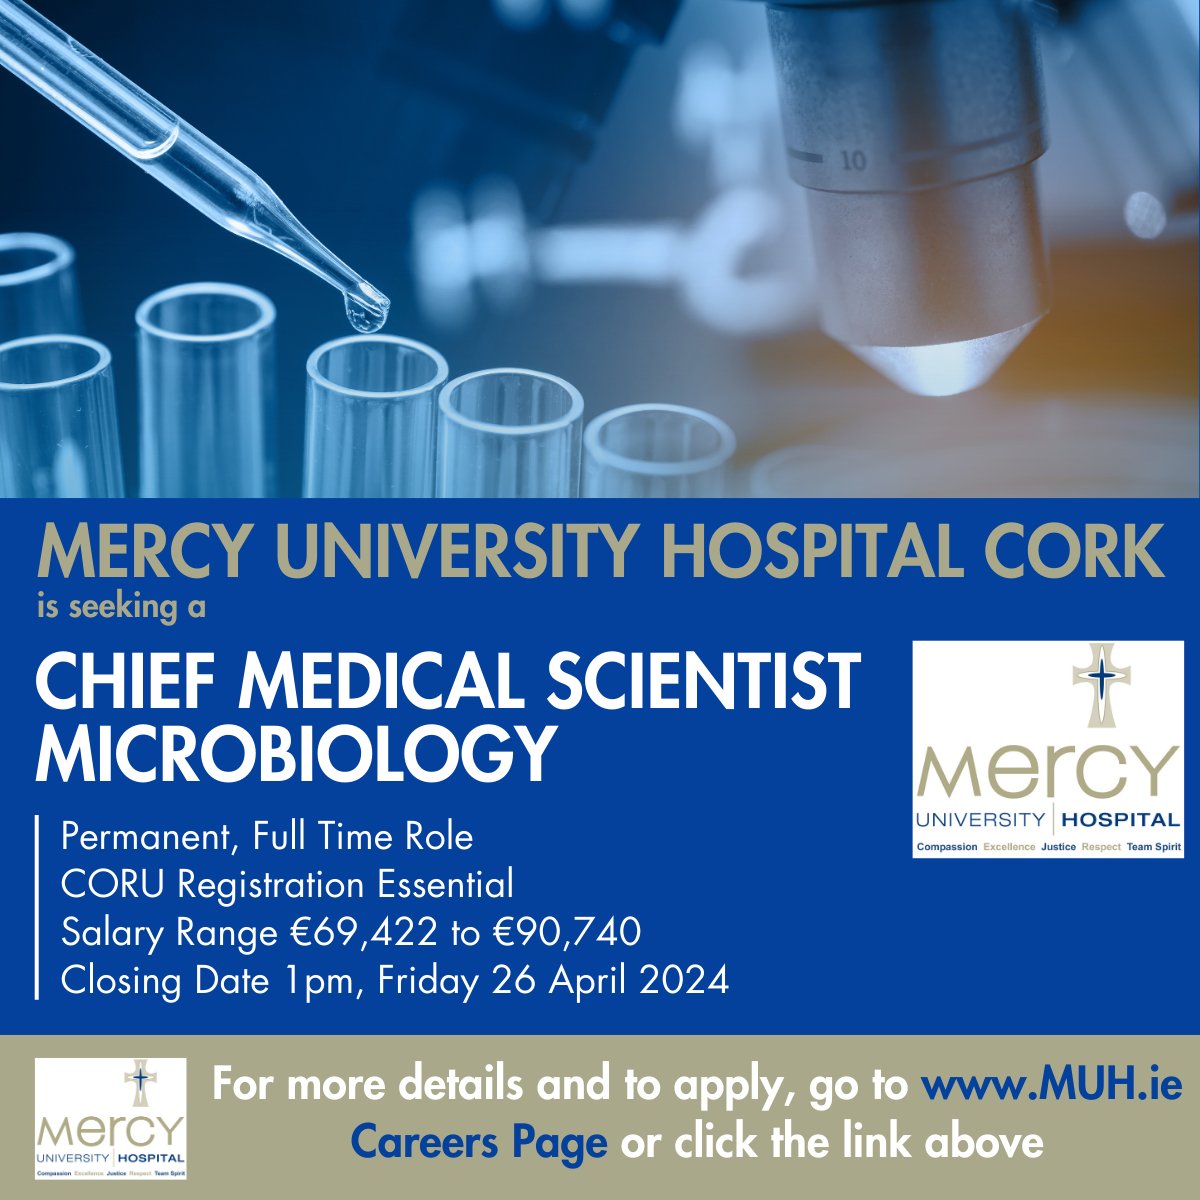 @Mercycork is seeking a Chief Medical Scientist #Microbiology. This is a superb career opportunity! CORU registration is essential. For more details and to apply click here: api.occupop.com/shared/job/chi… #ChiefMedicalScientist #HSEJobs #NHSJobs #MedicalScientist #CORU #CORKHospital